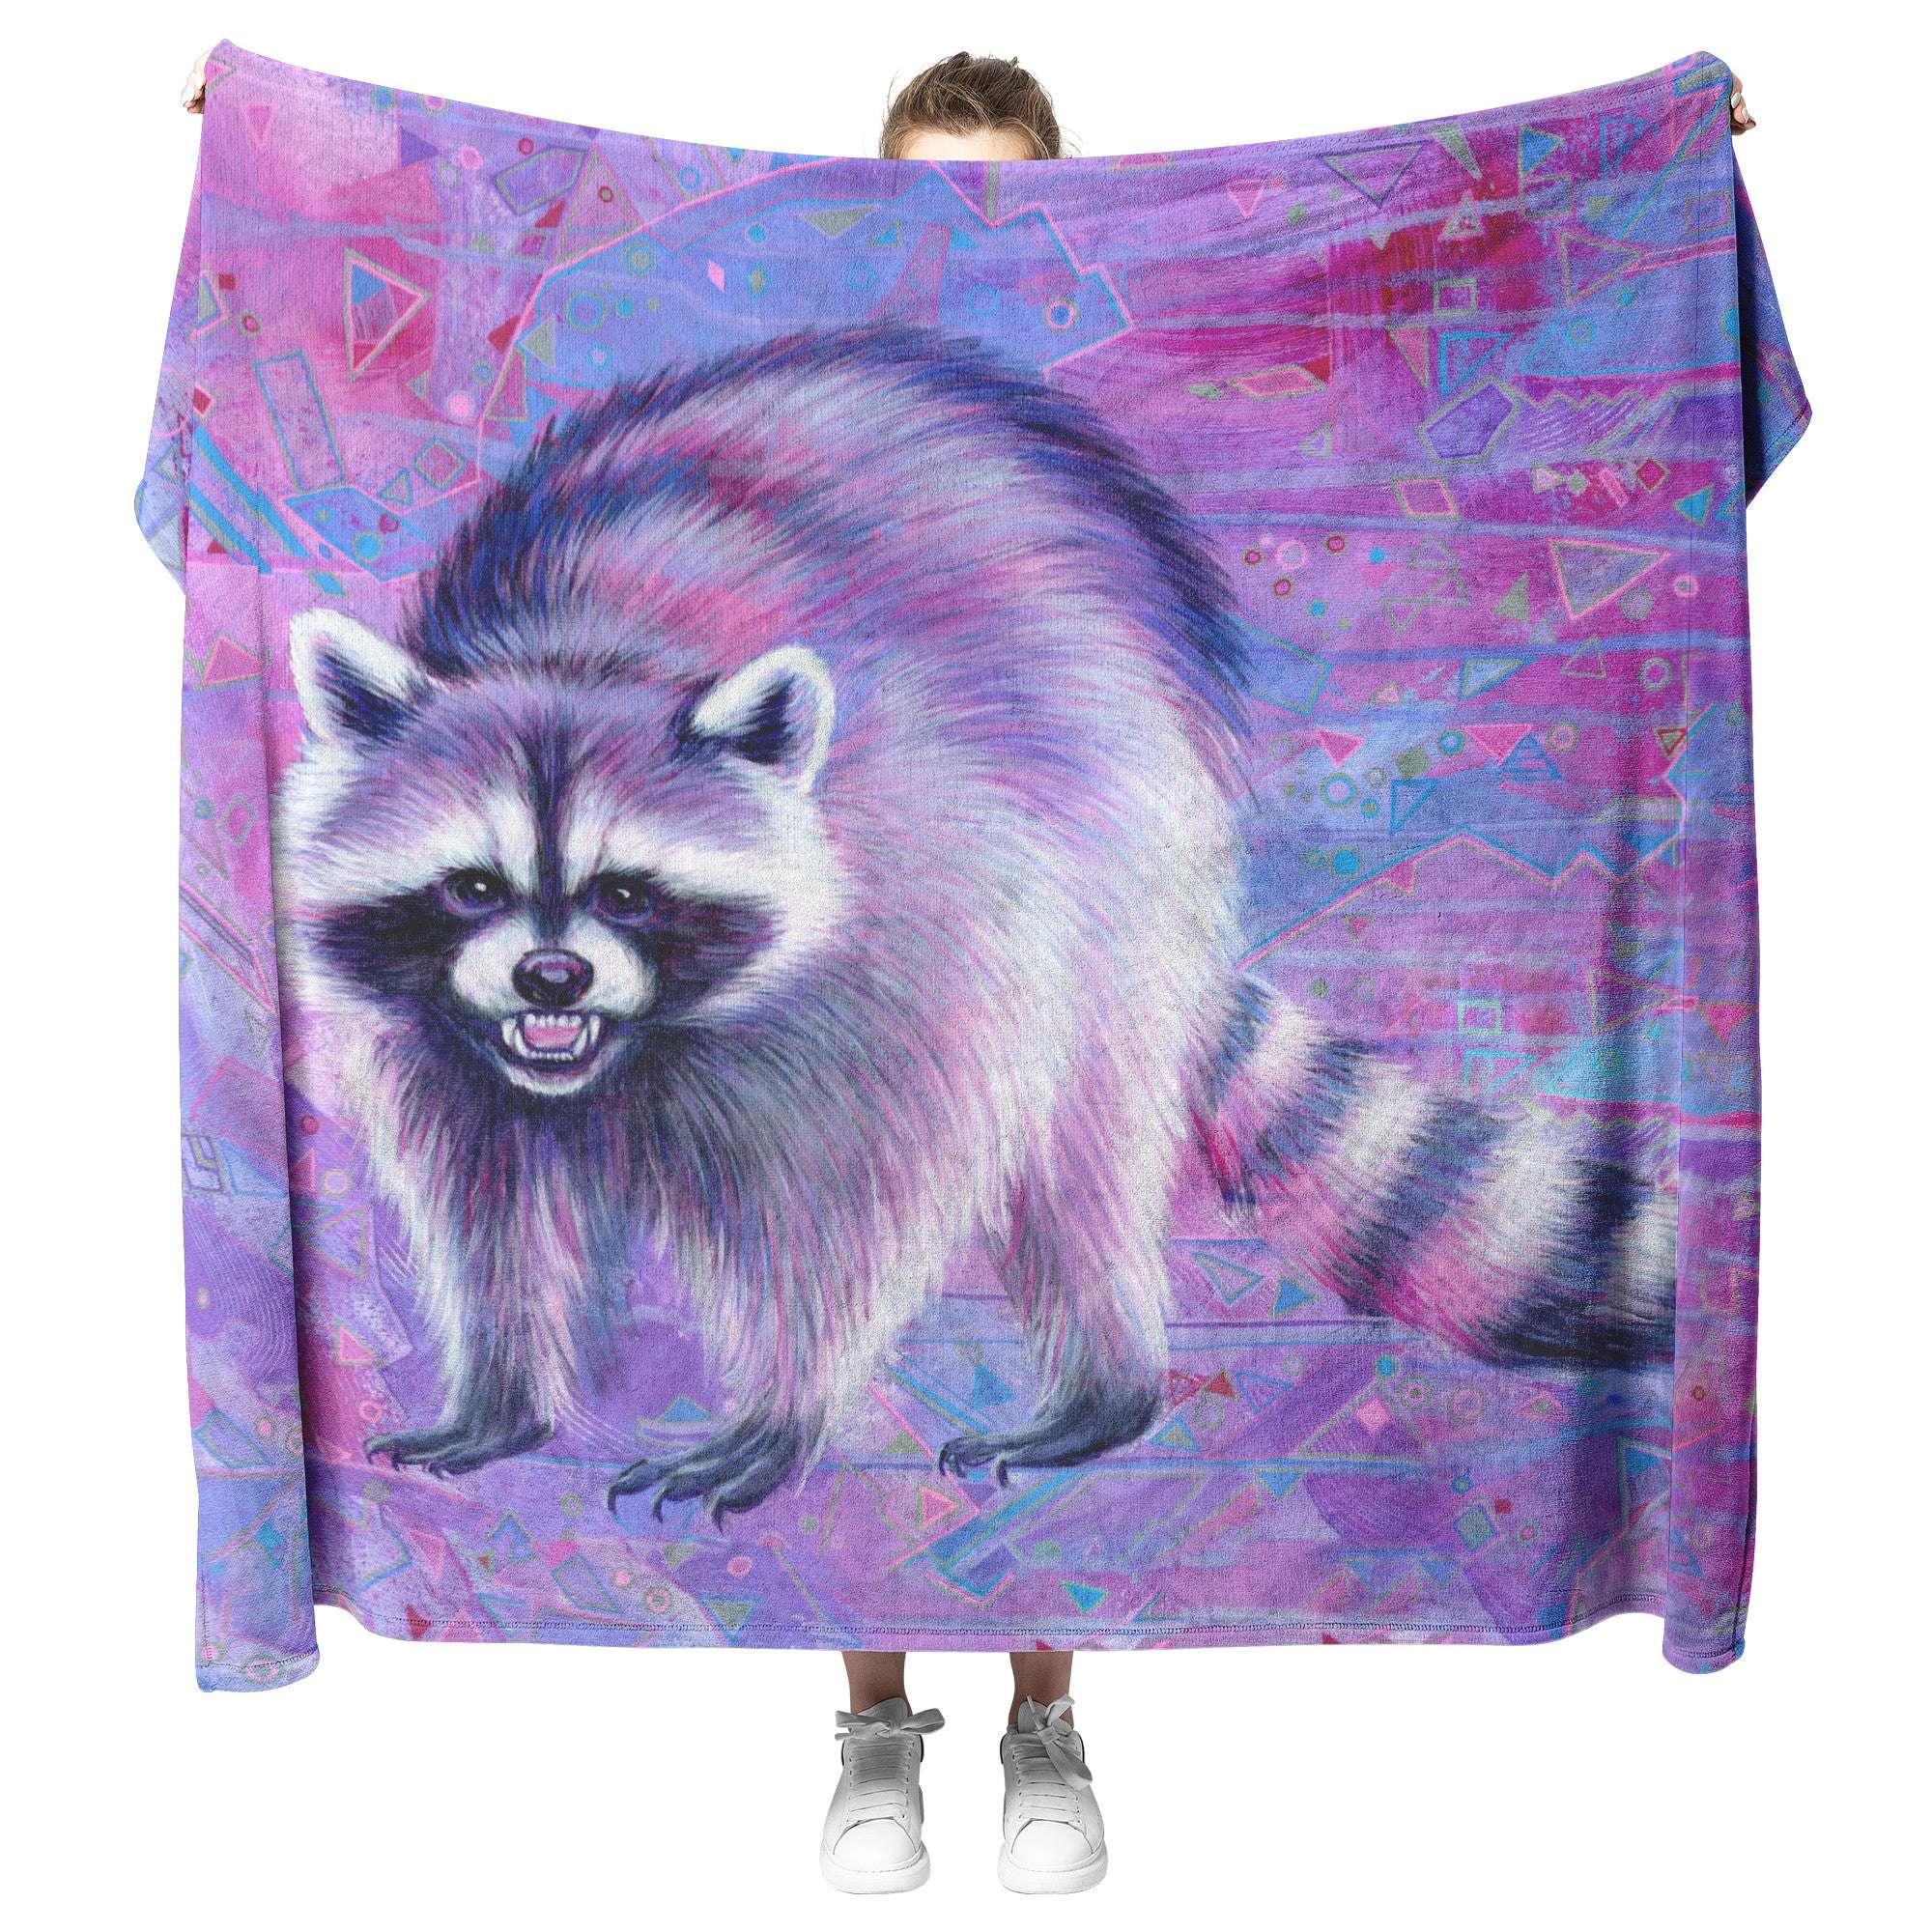 A person holding up a Raccoon Blanket featuring a detailed illustration of a raccoon against a geometric, purple-toned background.